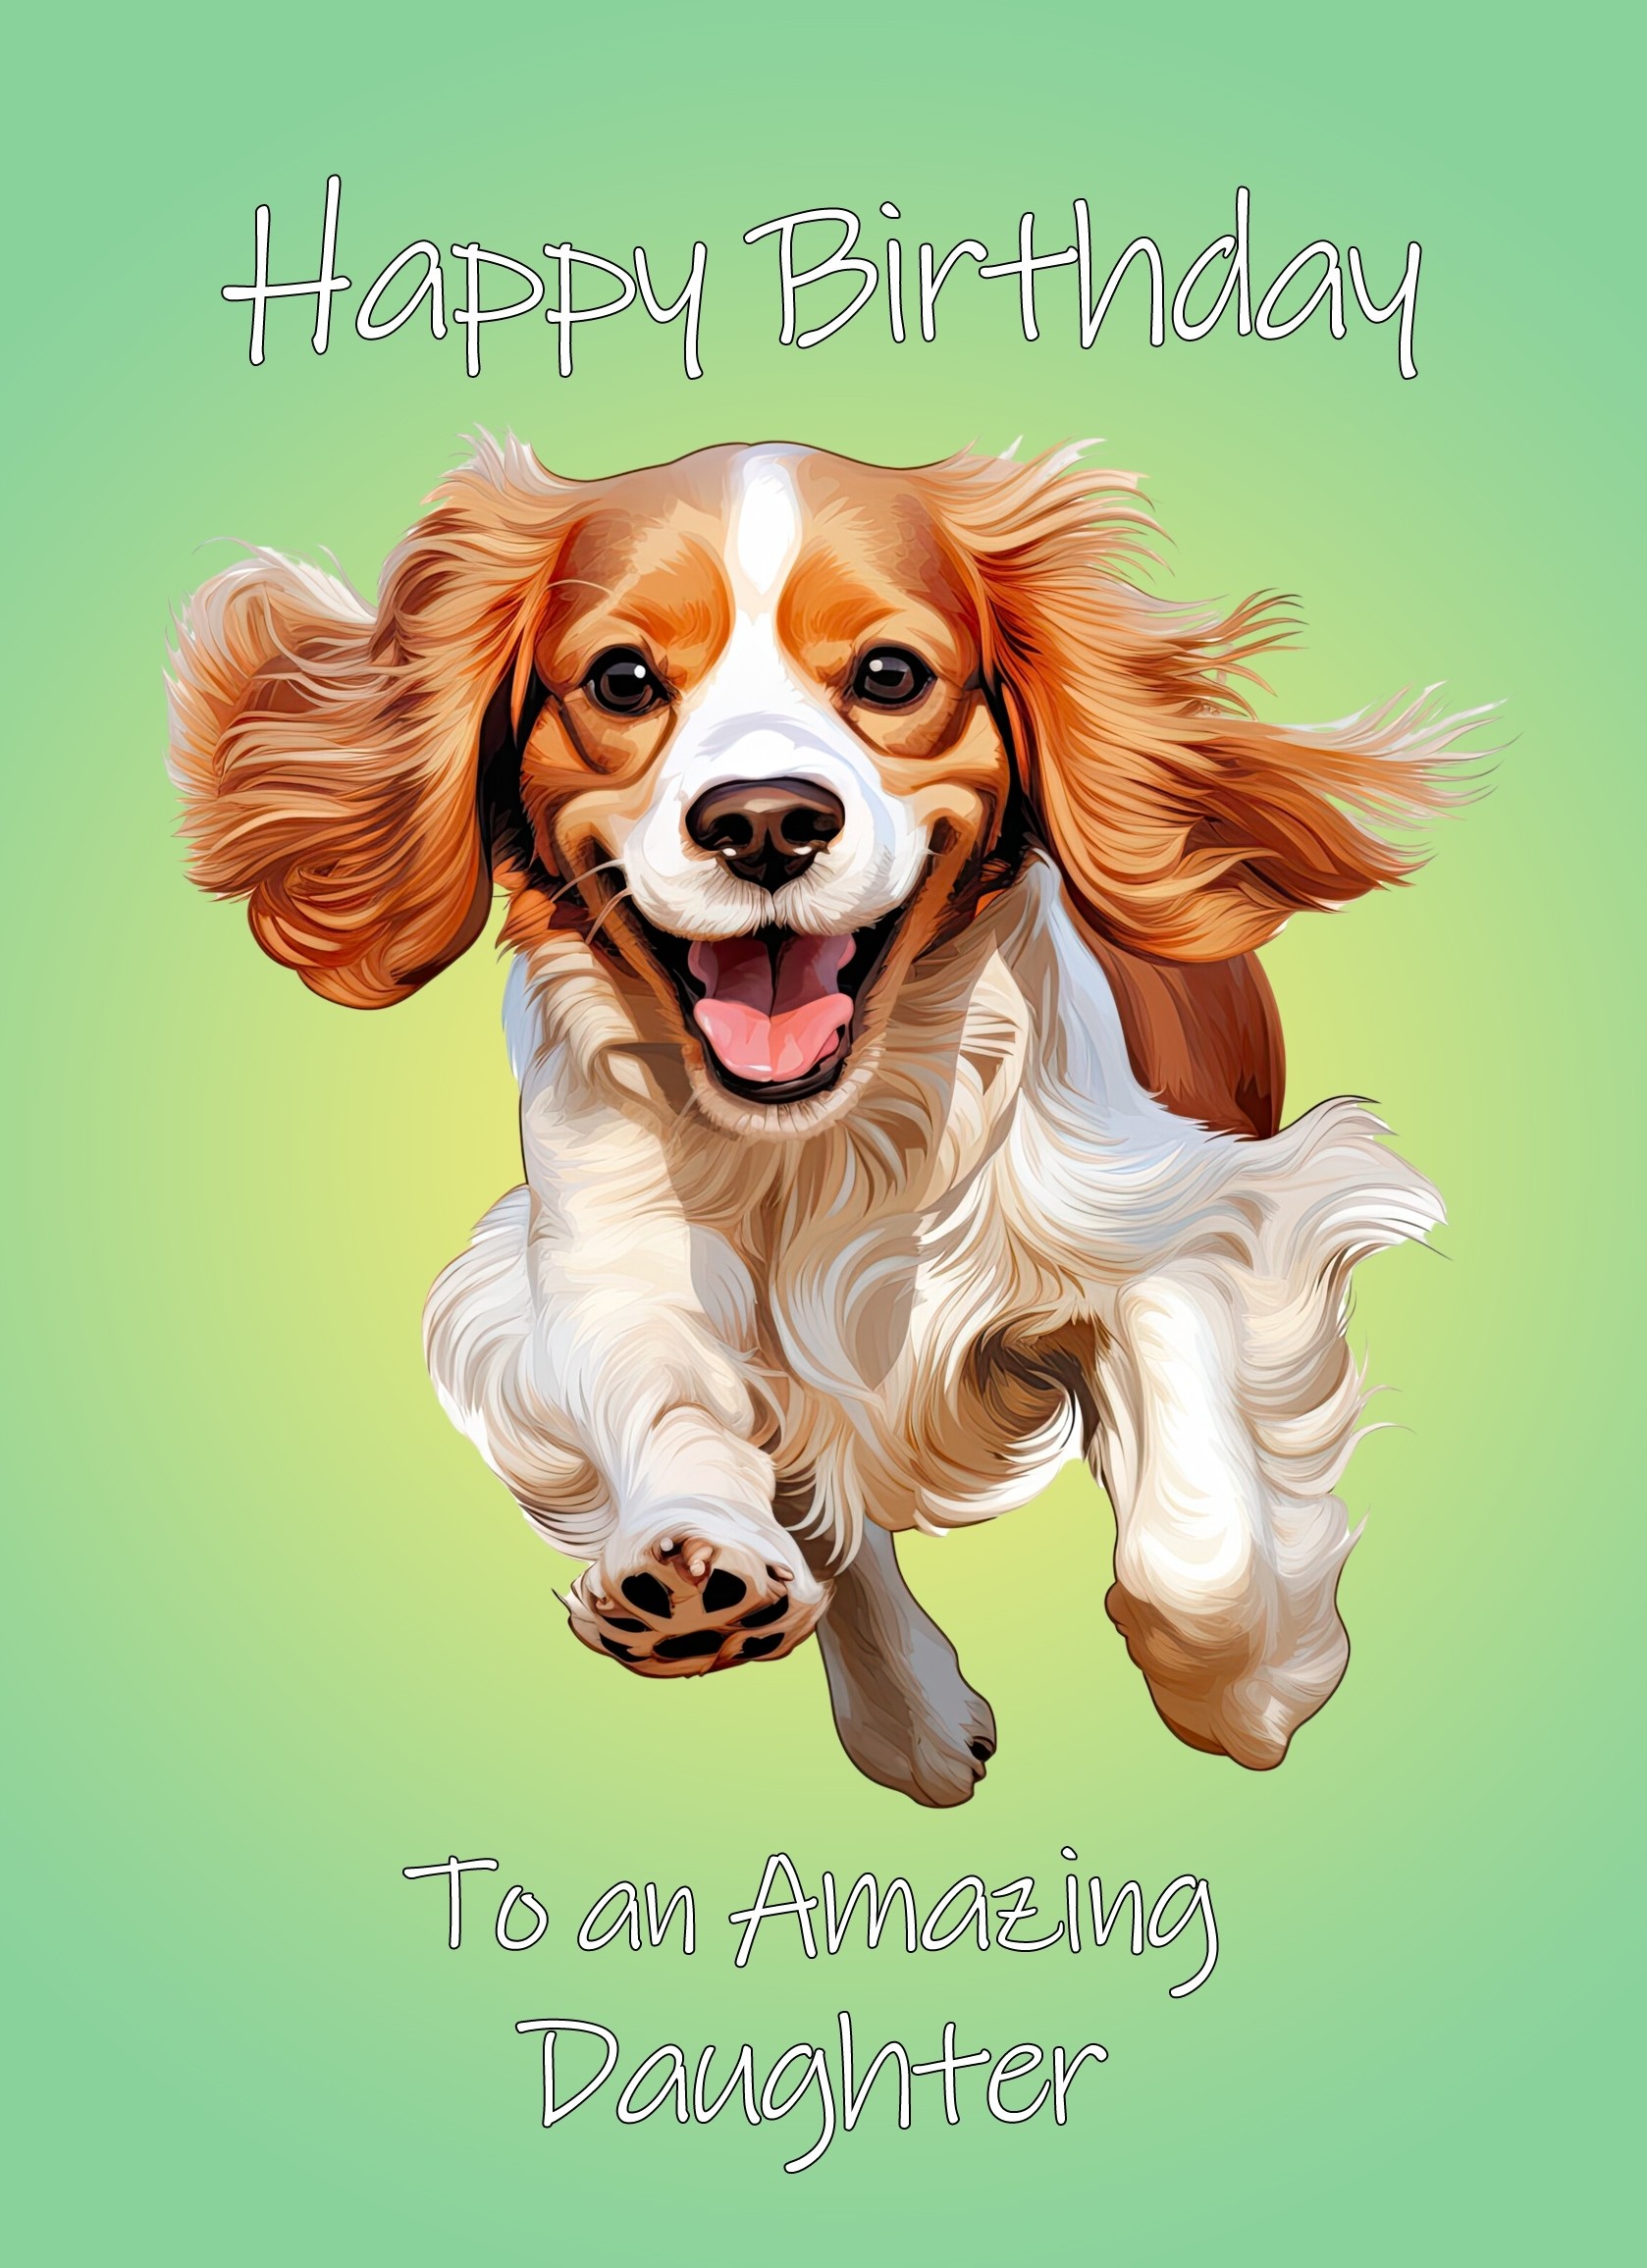 Cavalier King Charles Spaniel Dog Birthday Card For Daughter